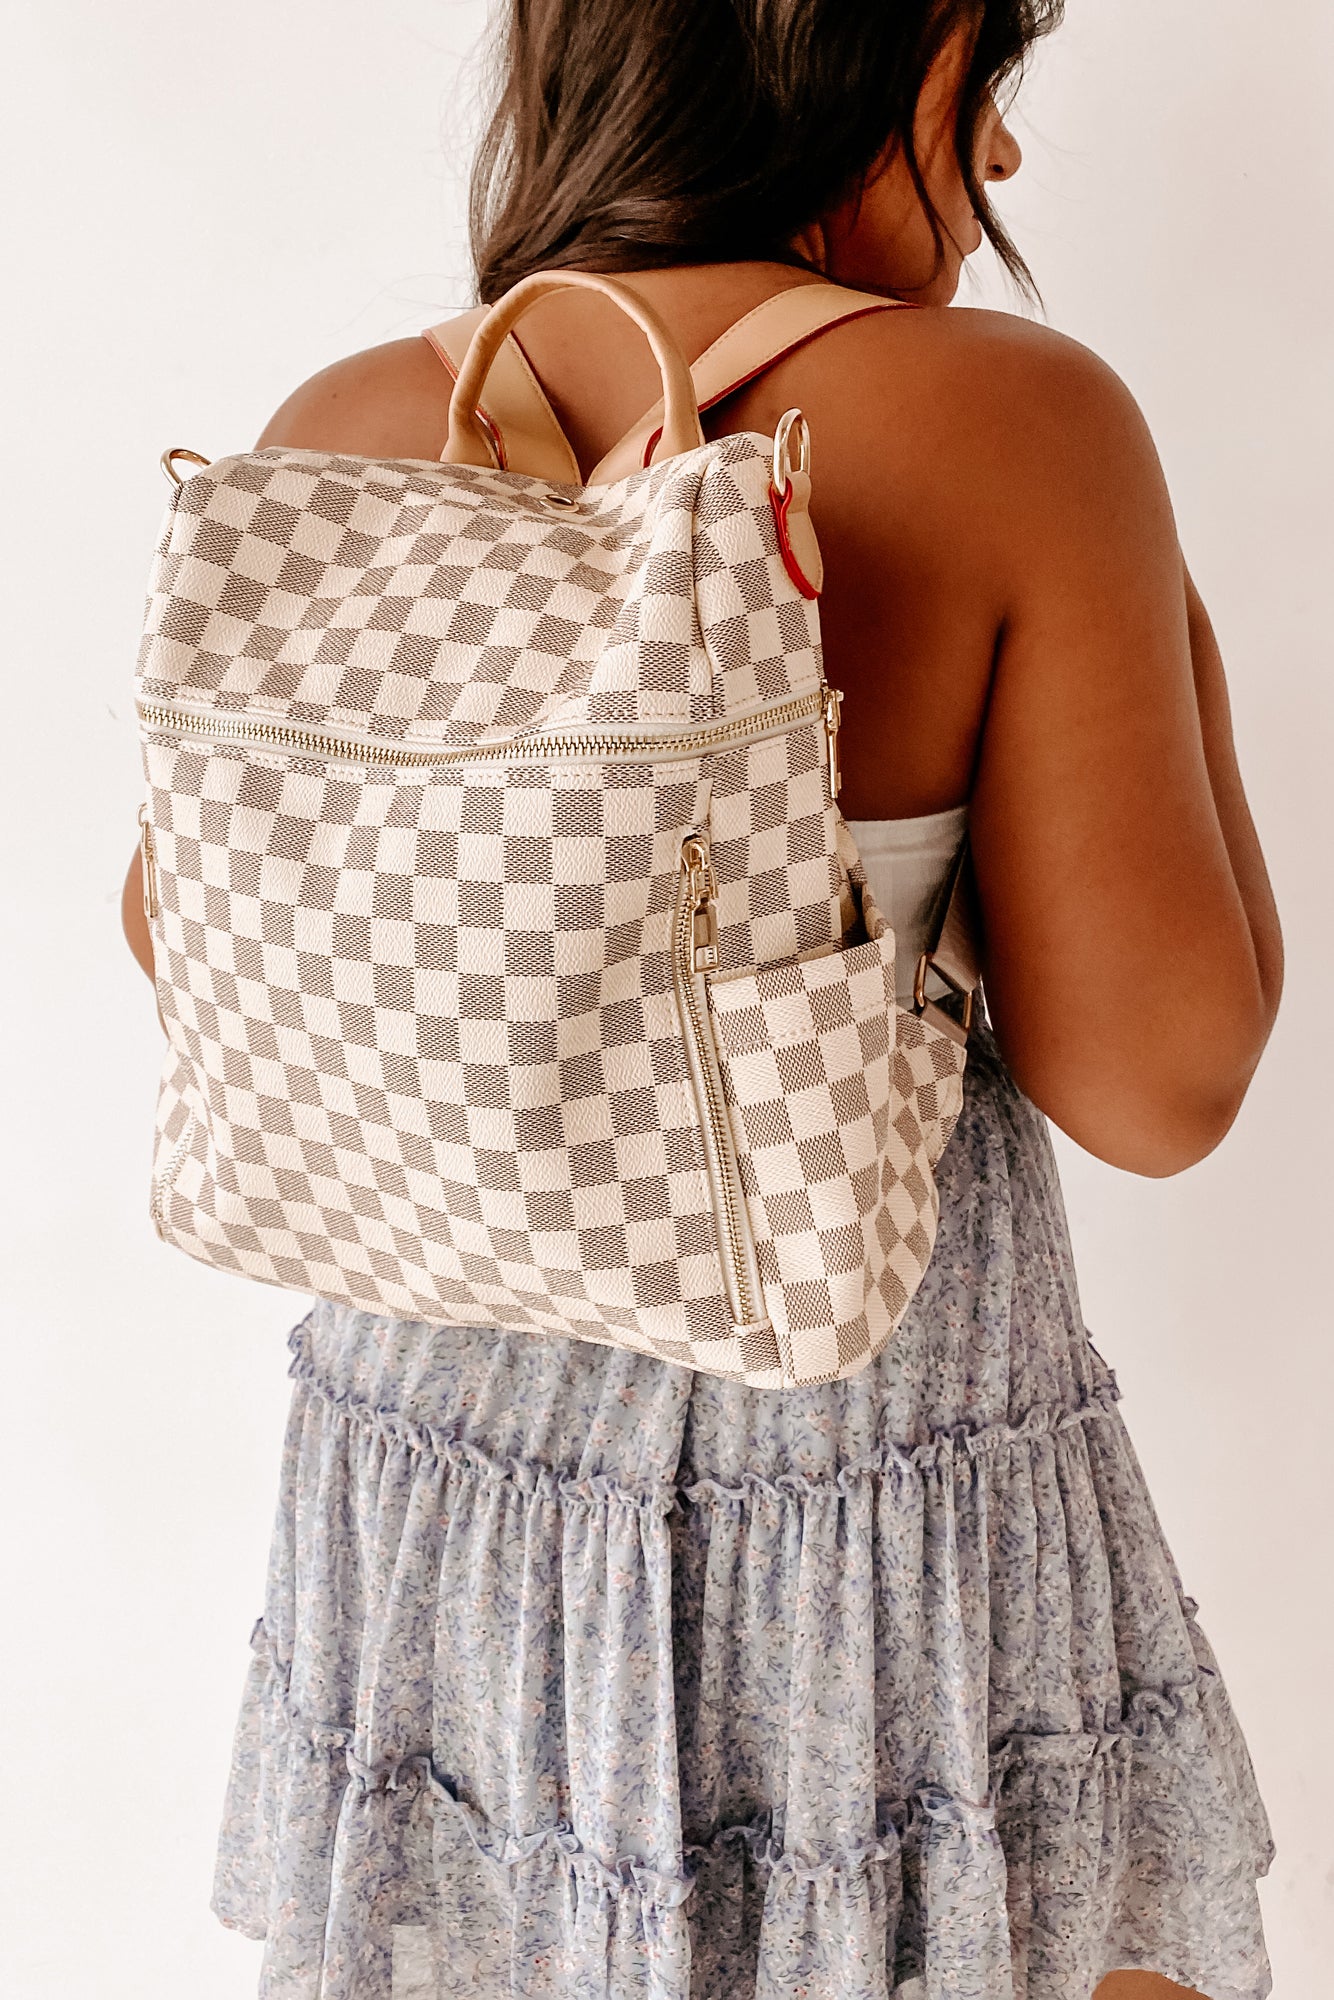 Style Effect Convertible Checkered Backpack (Brown)